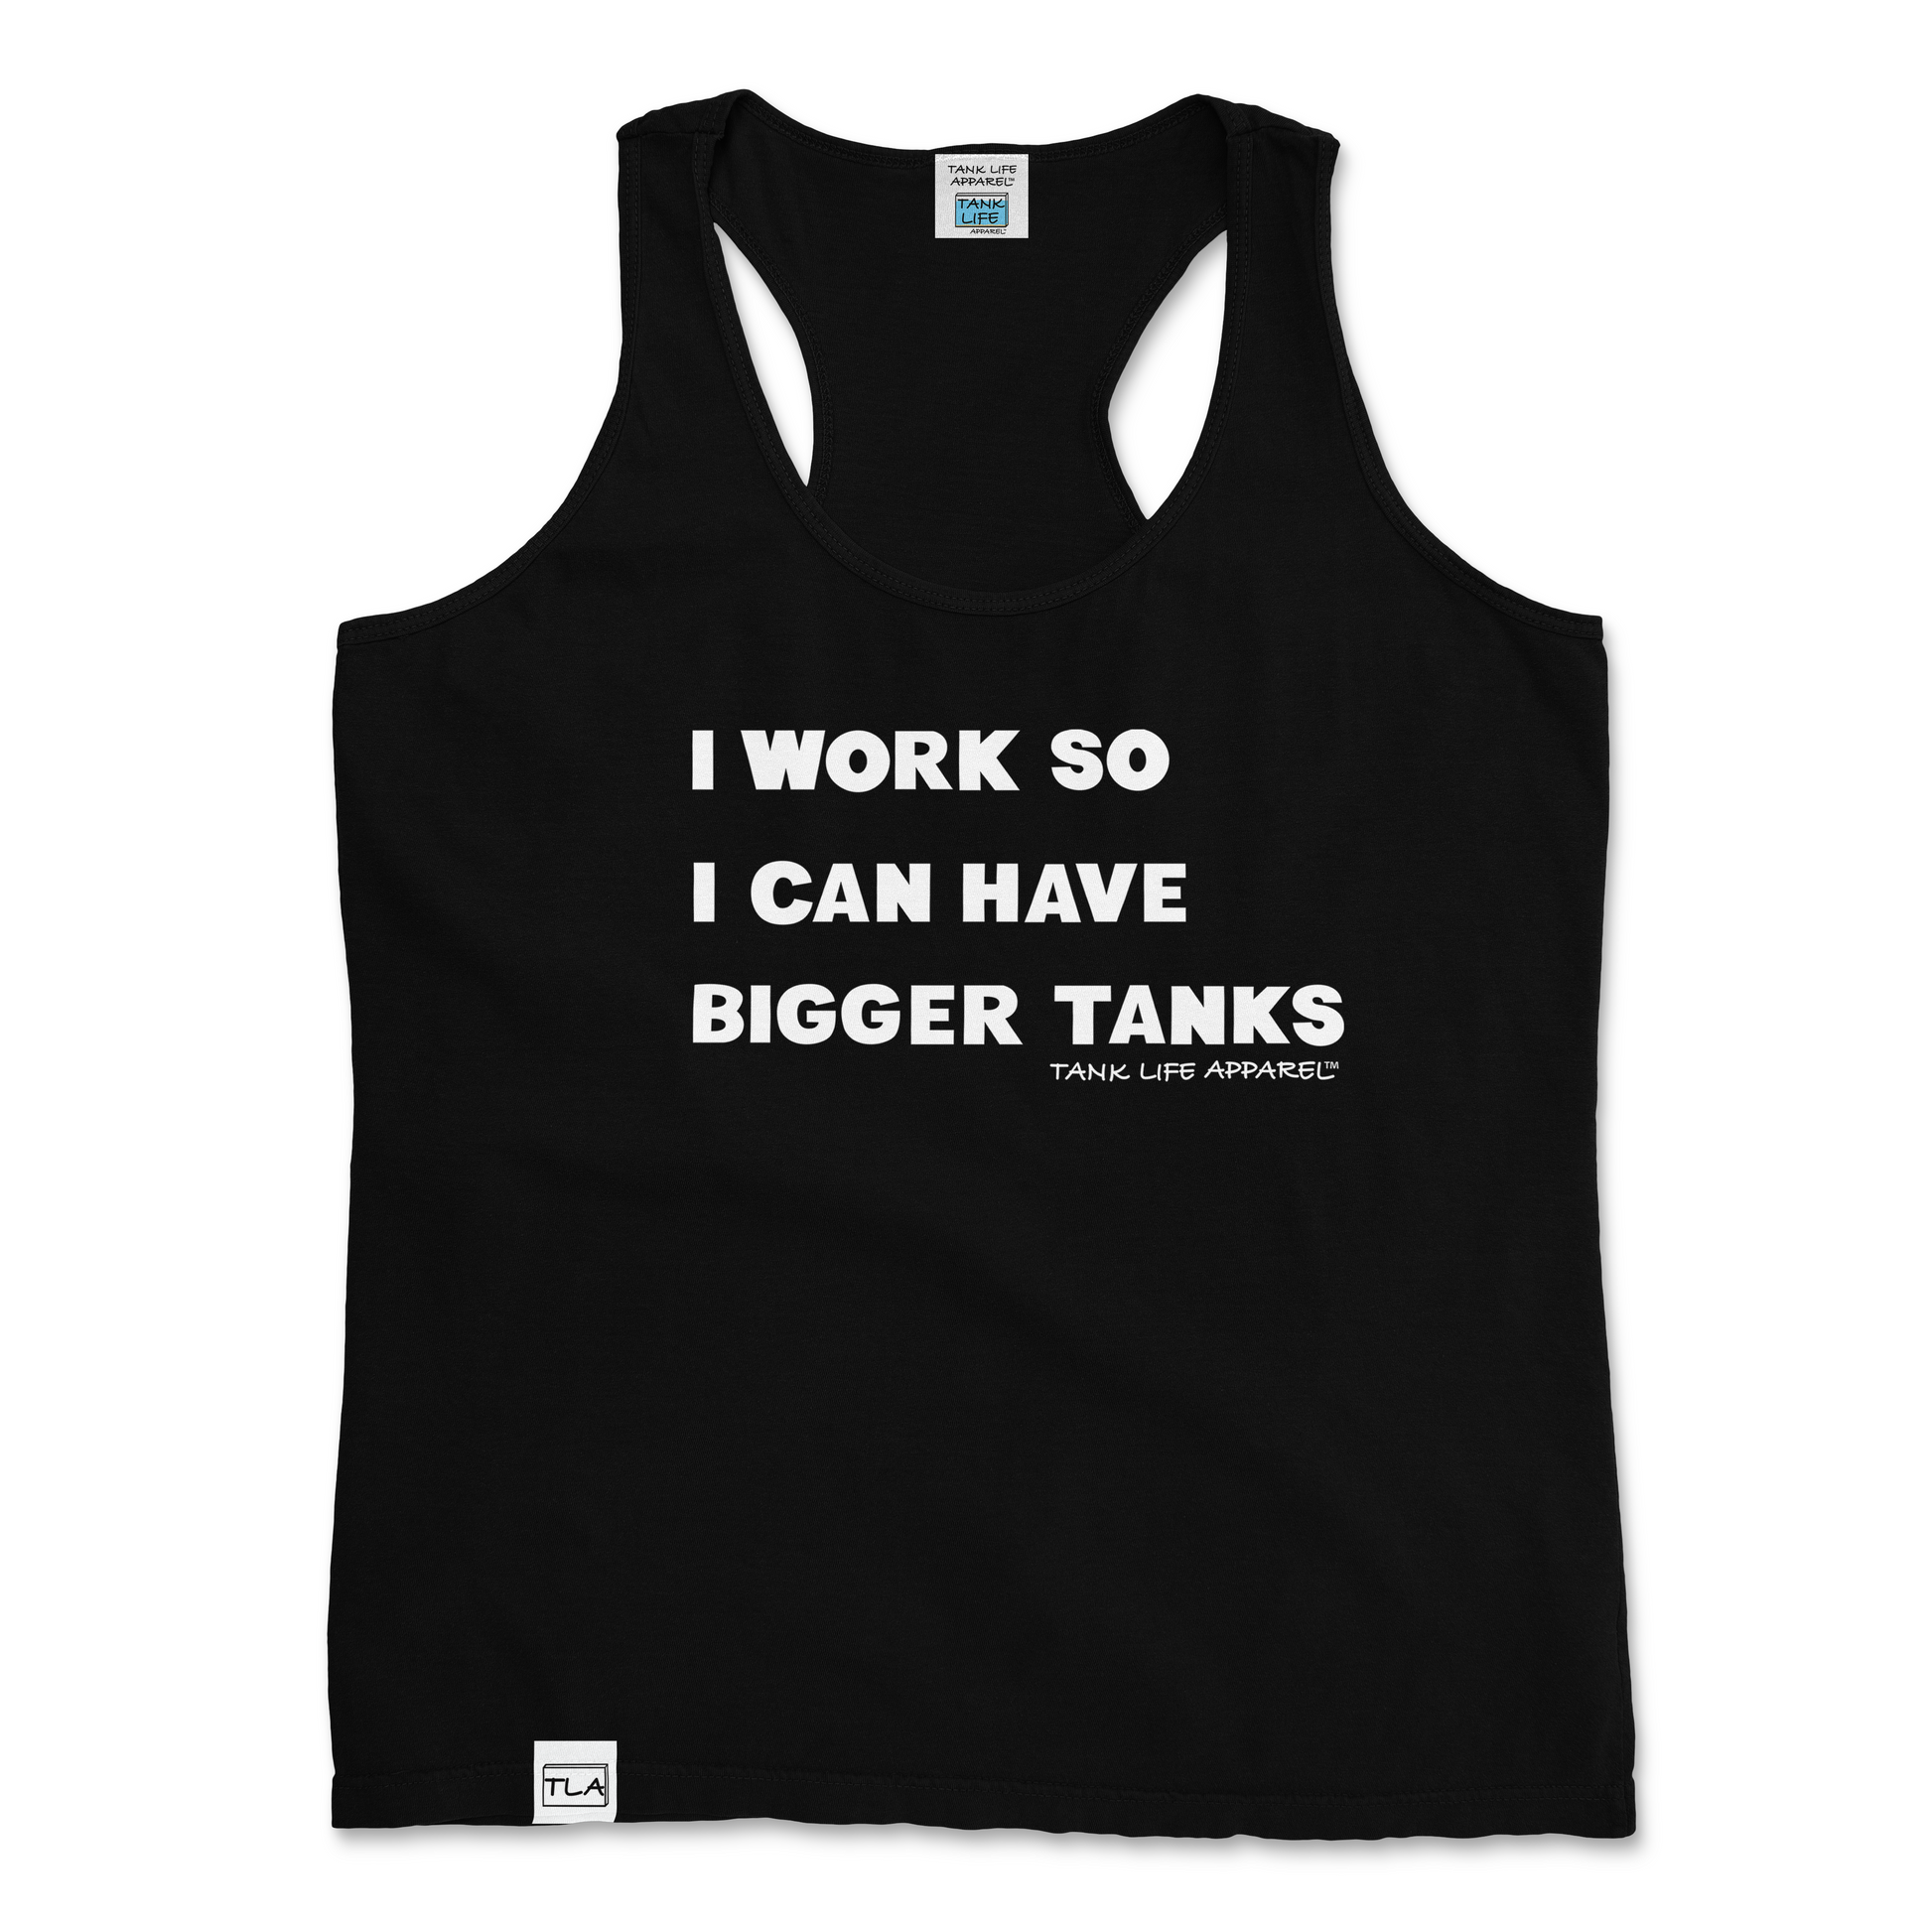 Rep the Tank Life Apparel "I work so I can have bigger tanks" design on a stylish women's tank top with our custom TLA hem label.